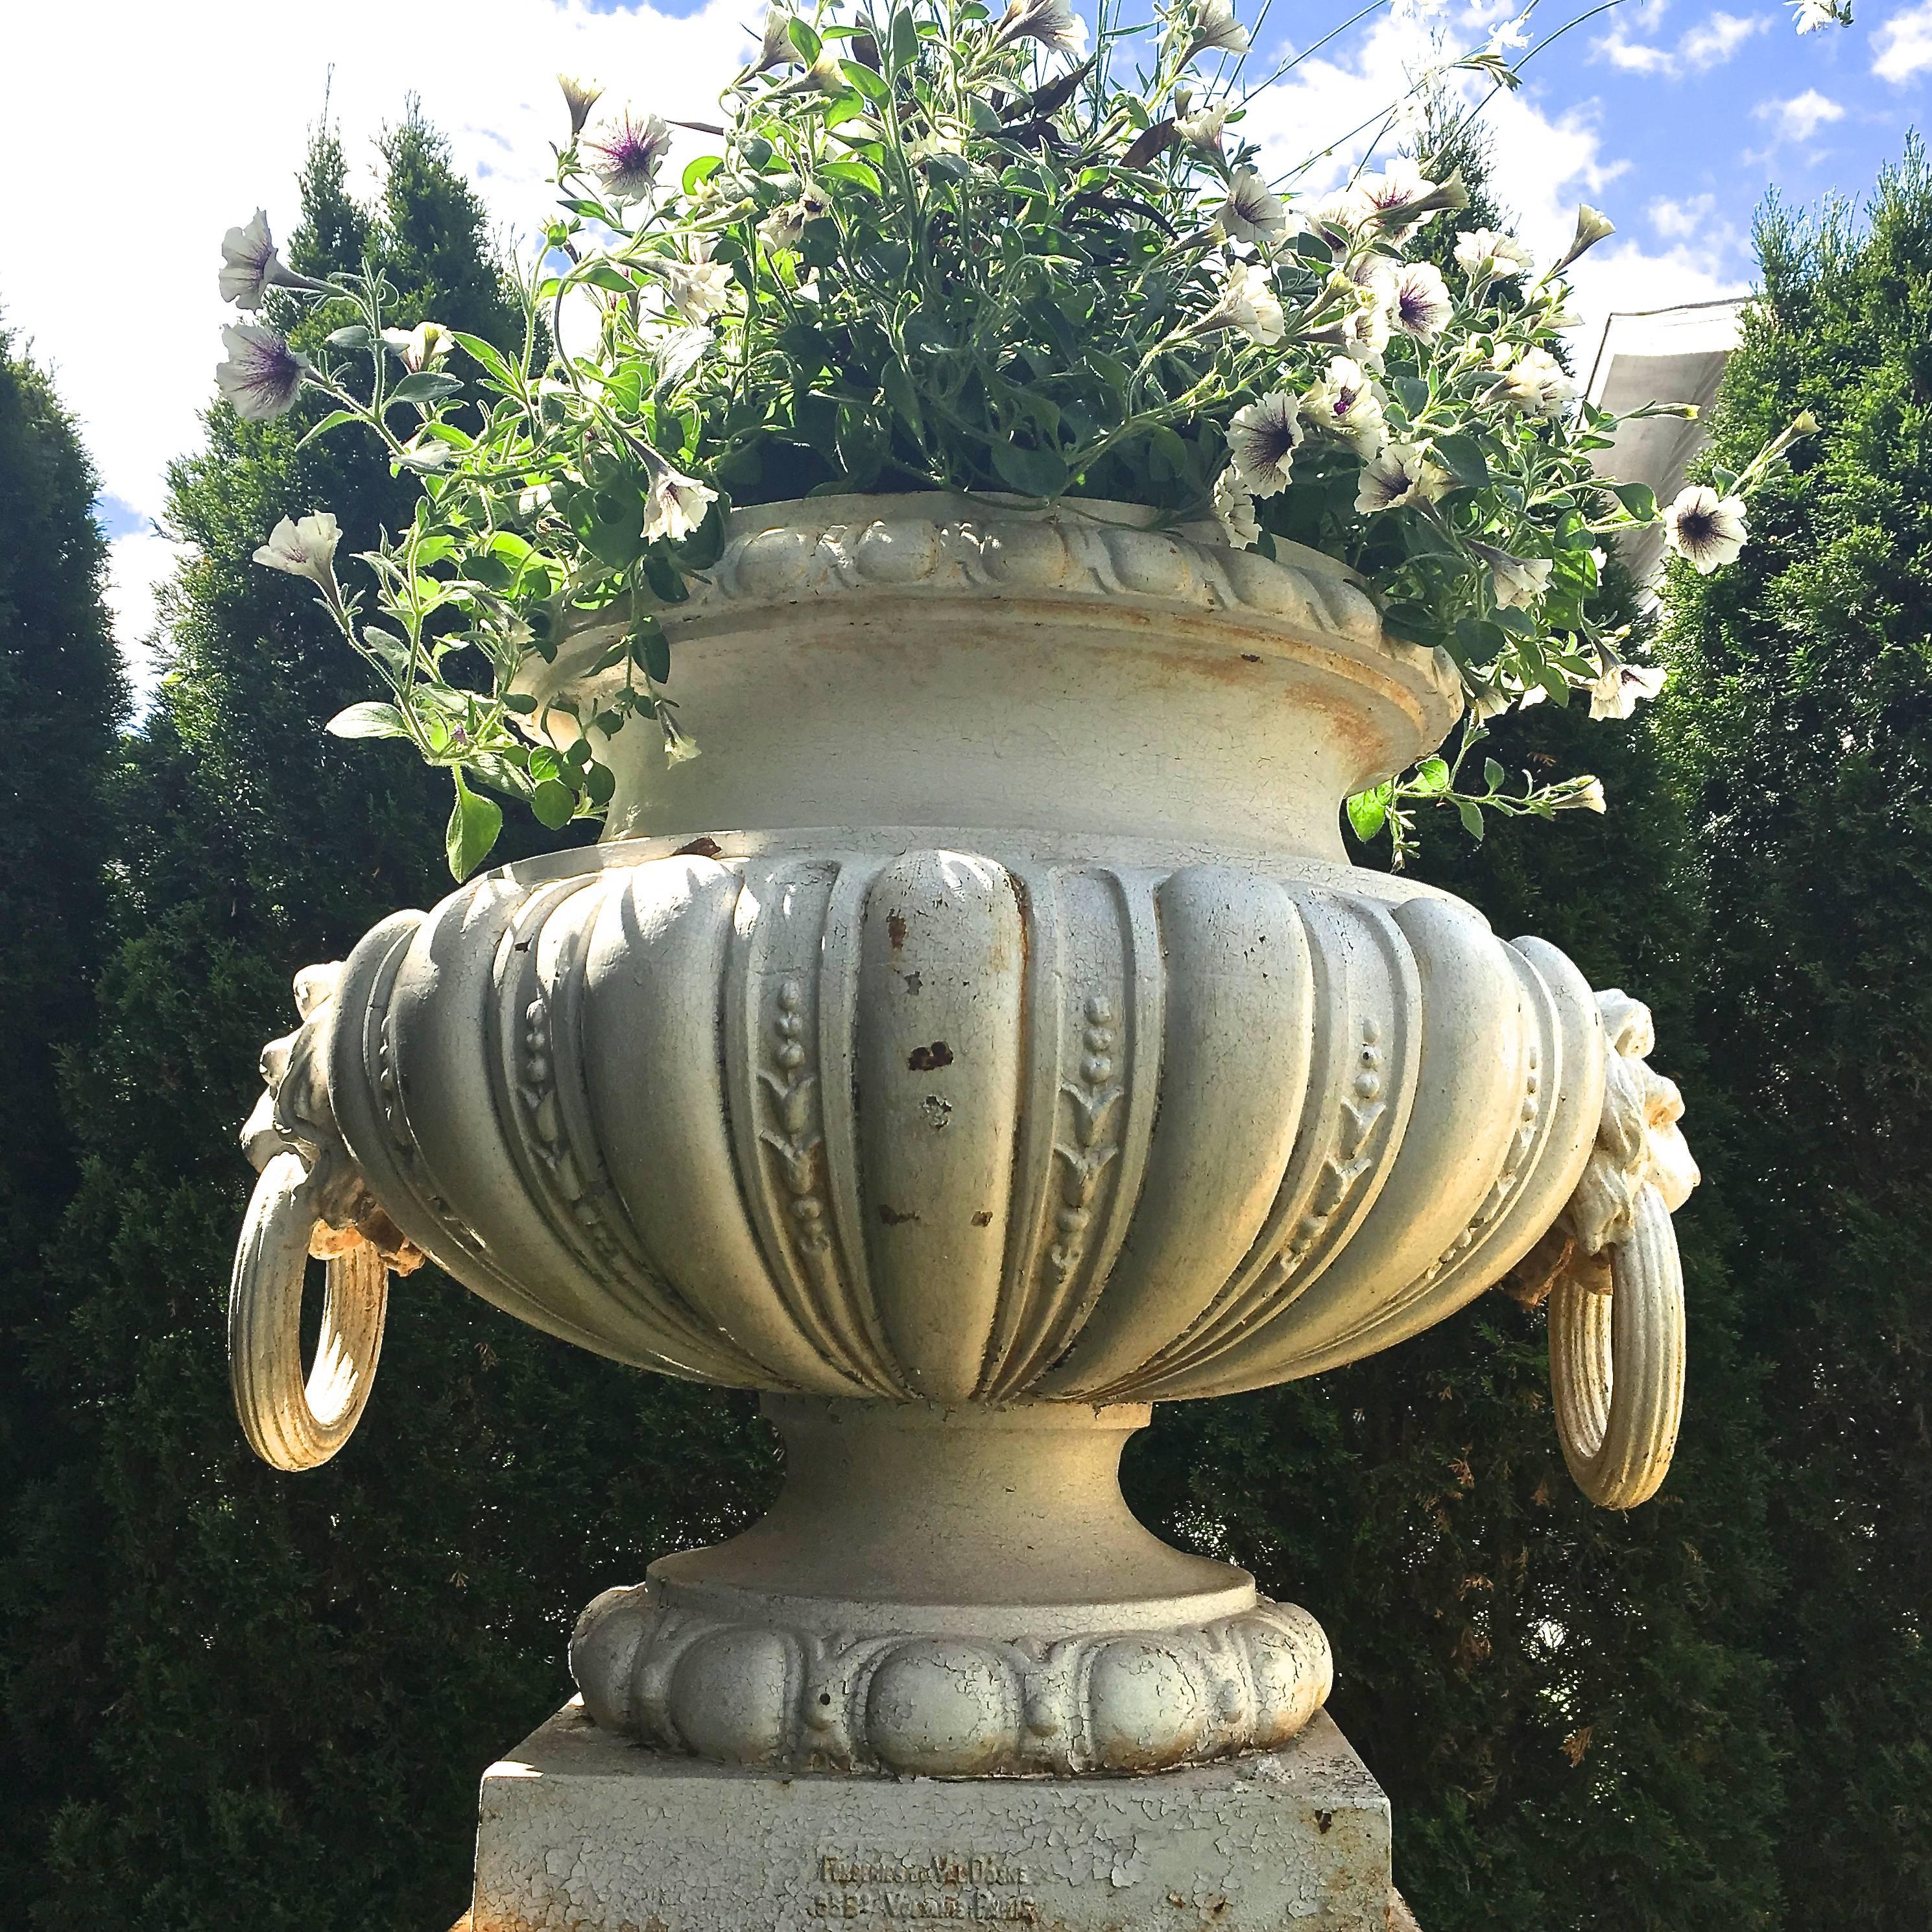 French Statuesque Pair of Rare Estate-Sized Val d'Osne Cast Iron Urns on Tall Plinths For Sale